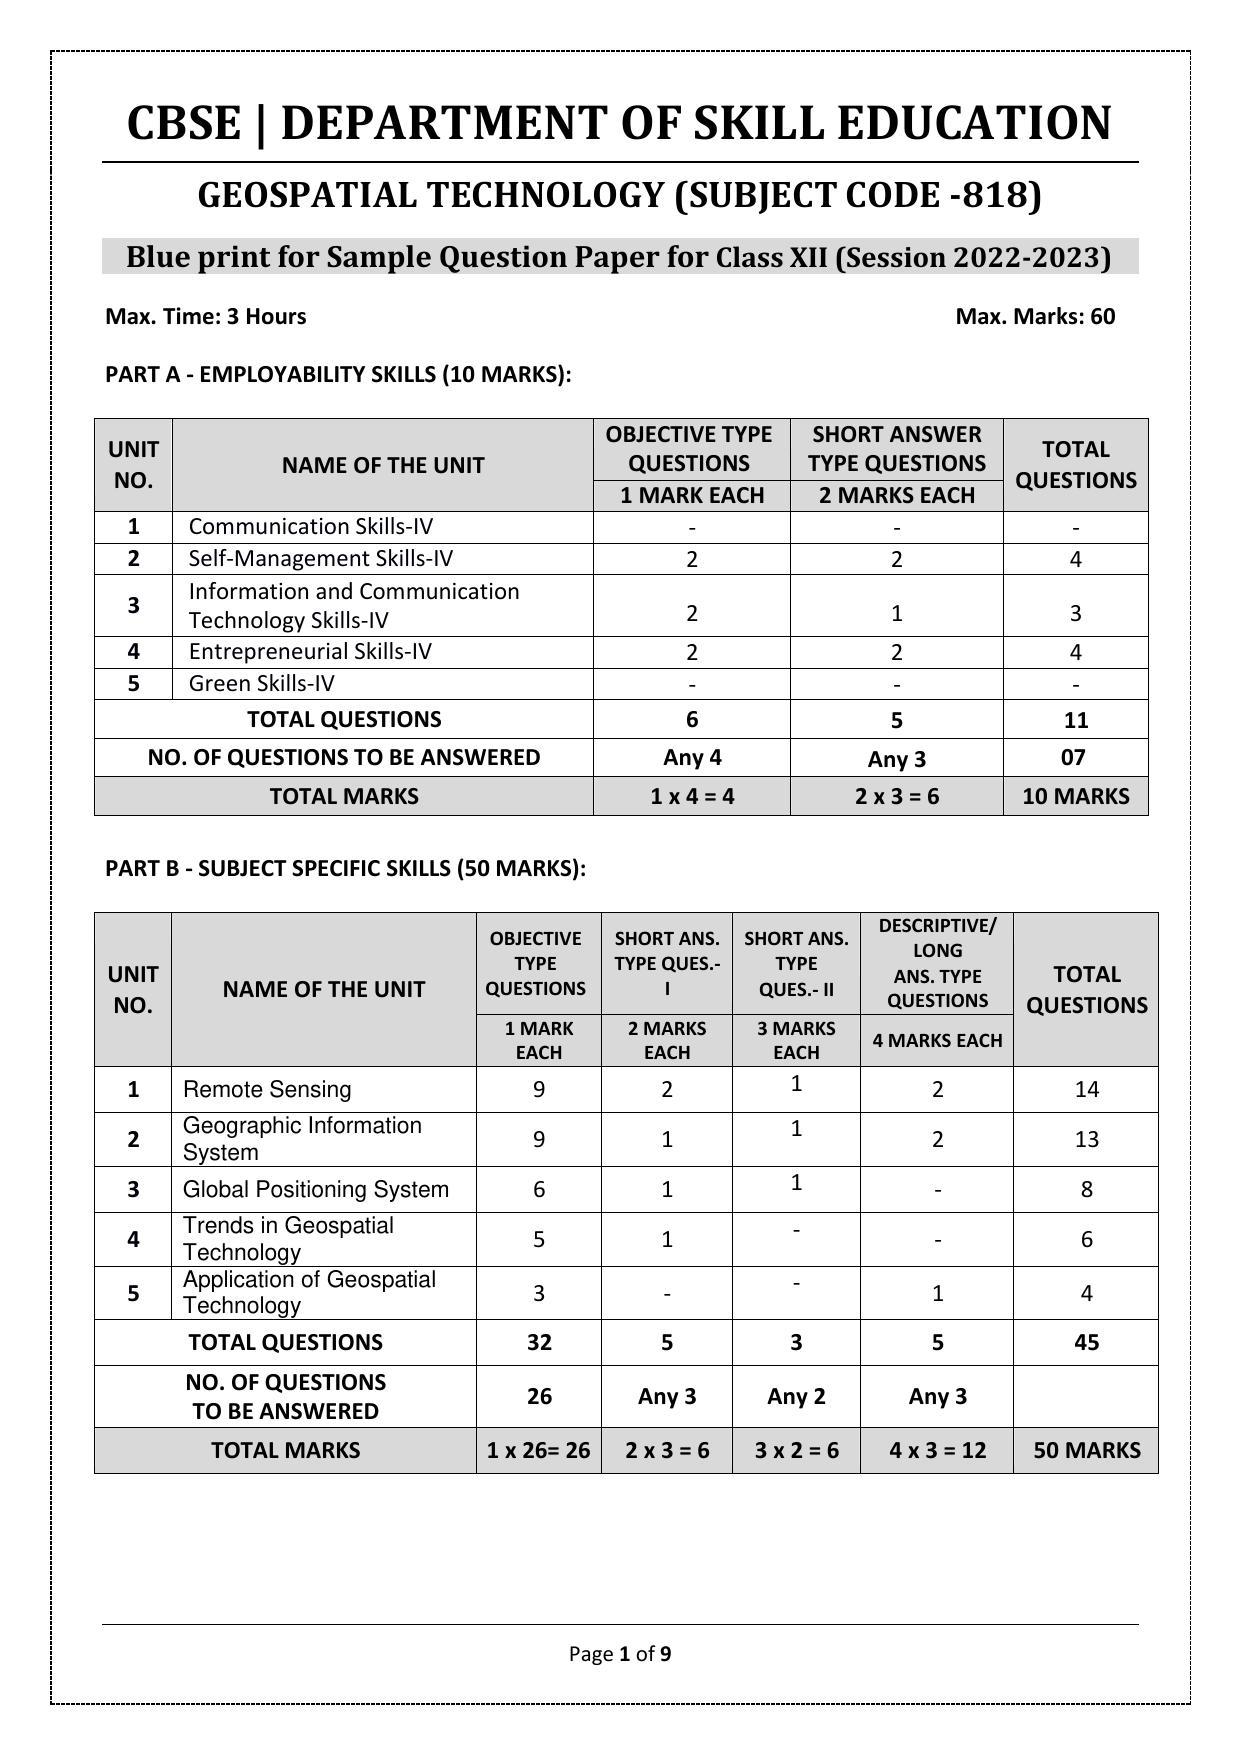 CBSE Class 12 Geospatial Technology (Skill Education) Sample Papers 2023 - Page 1